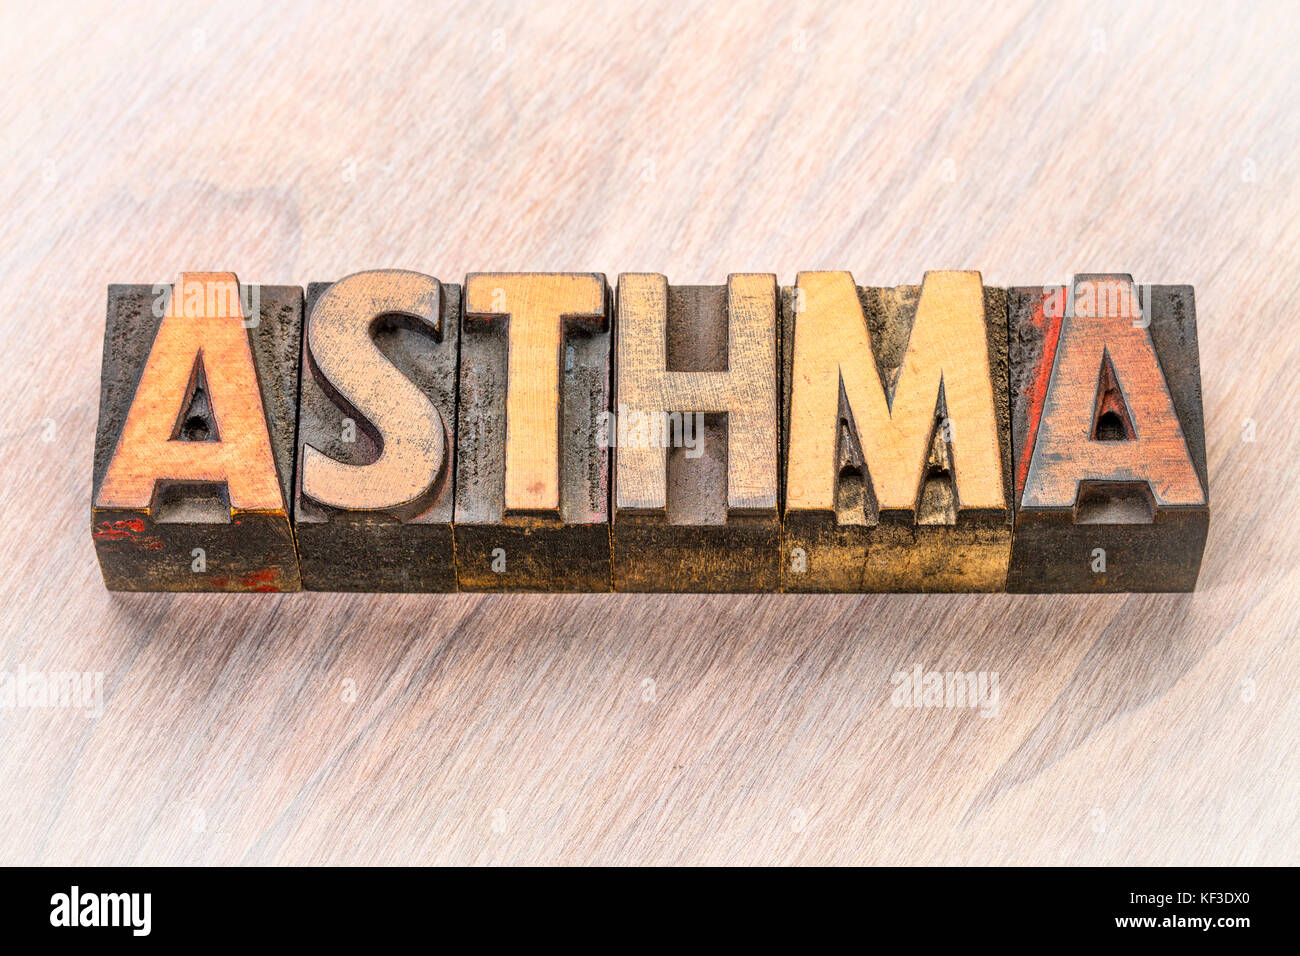 asthma word abstract in vintage letterpress wood type Stock Photo